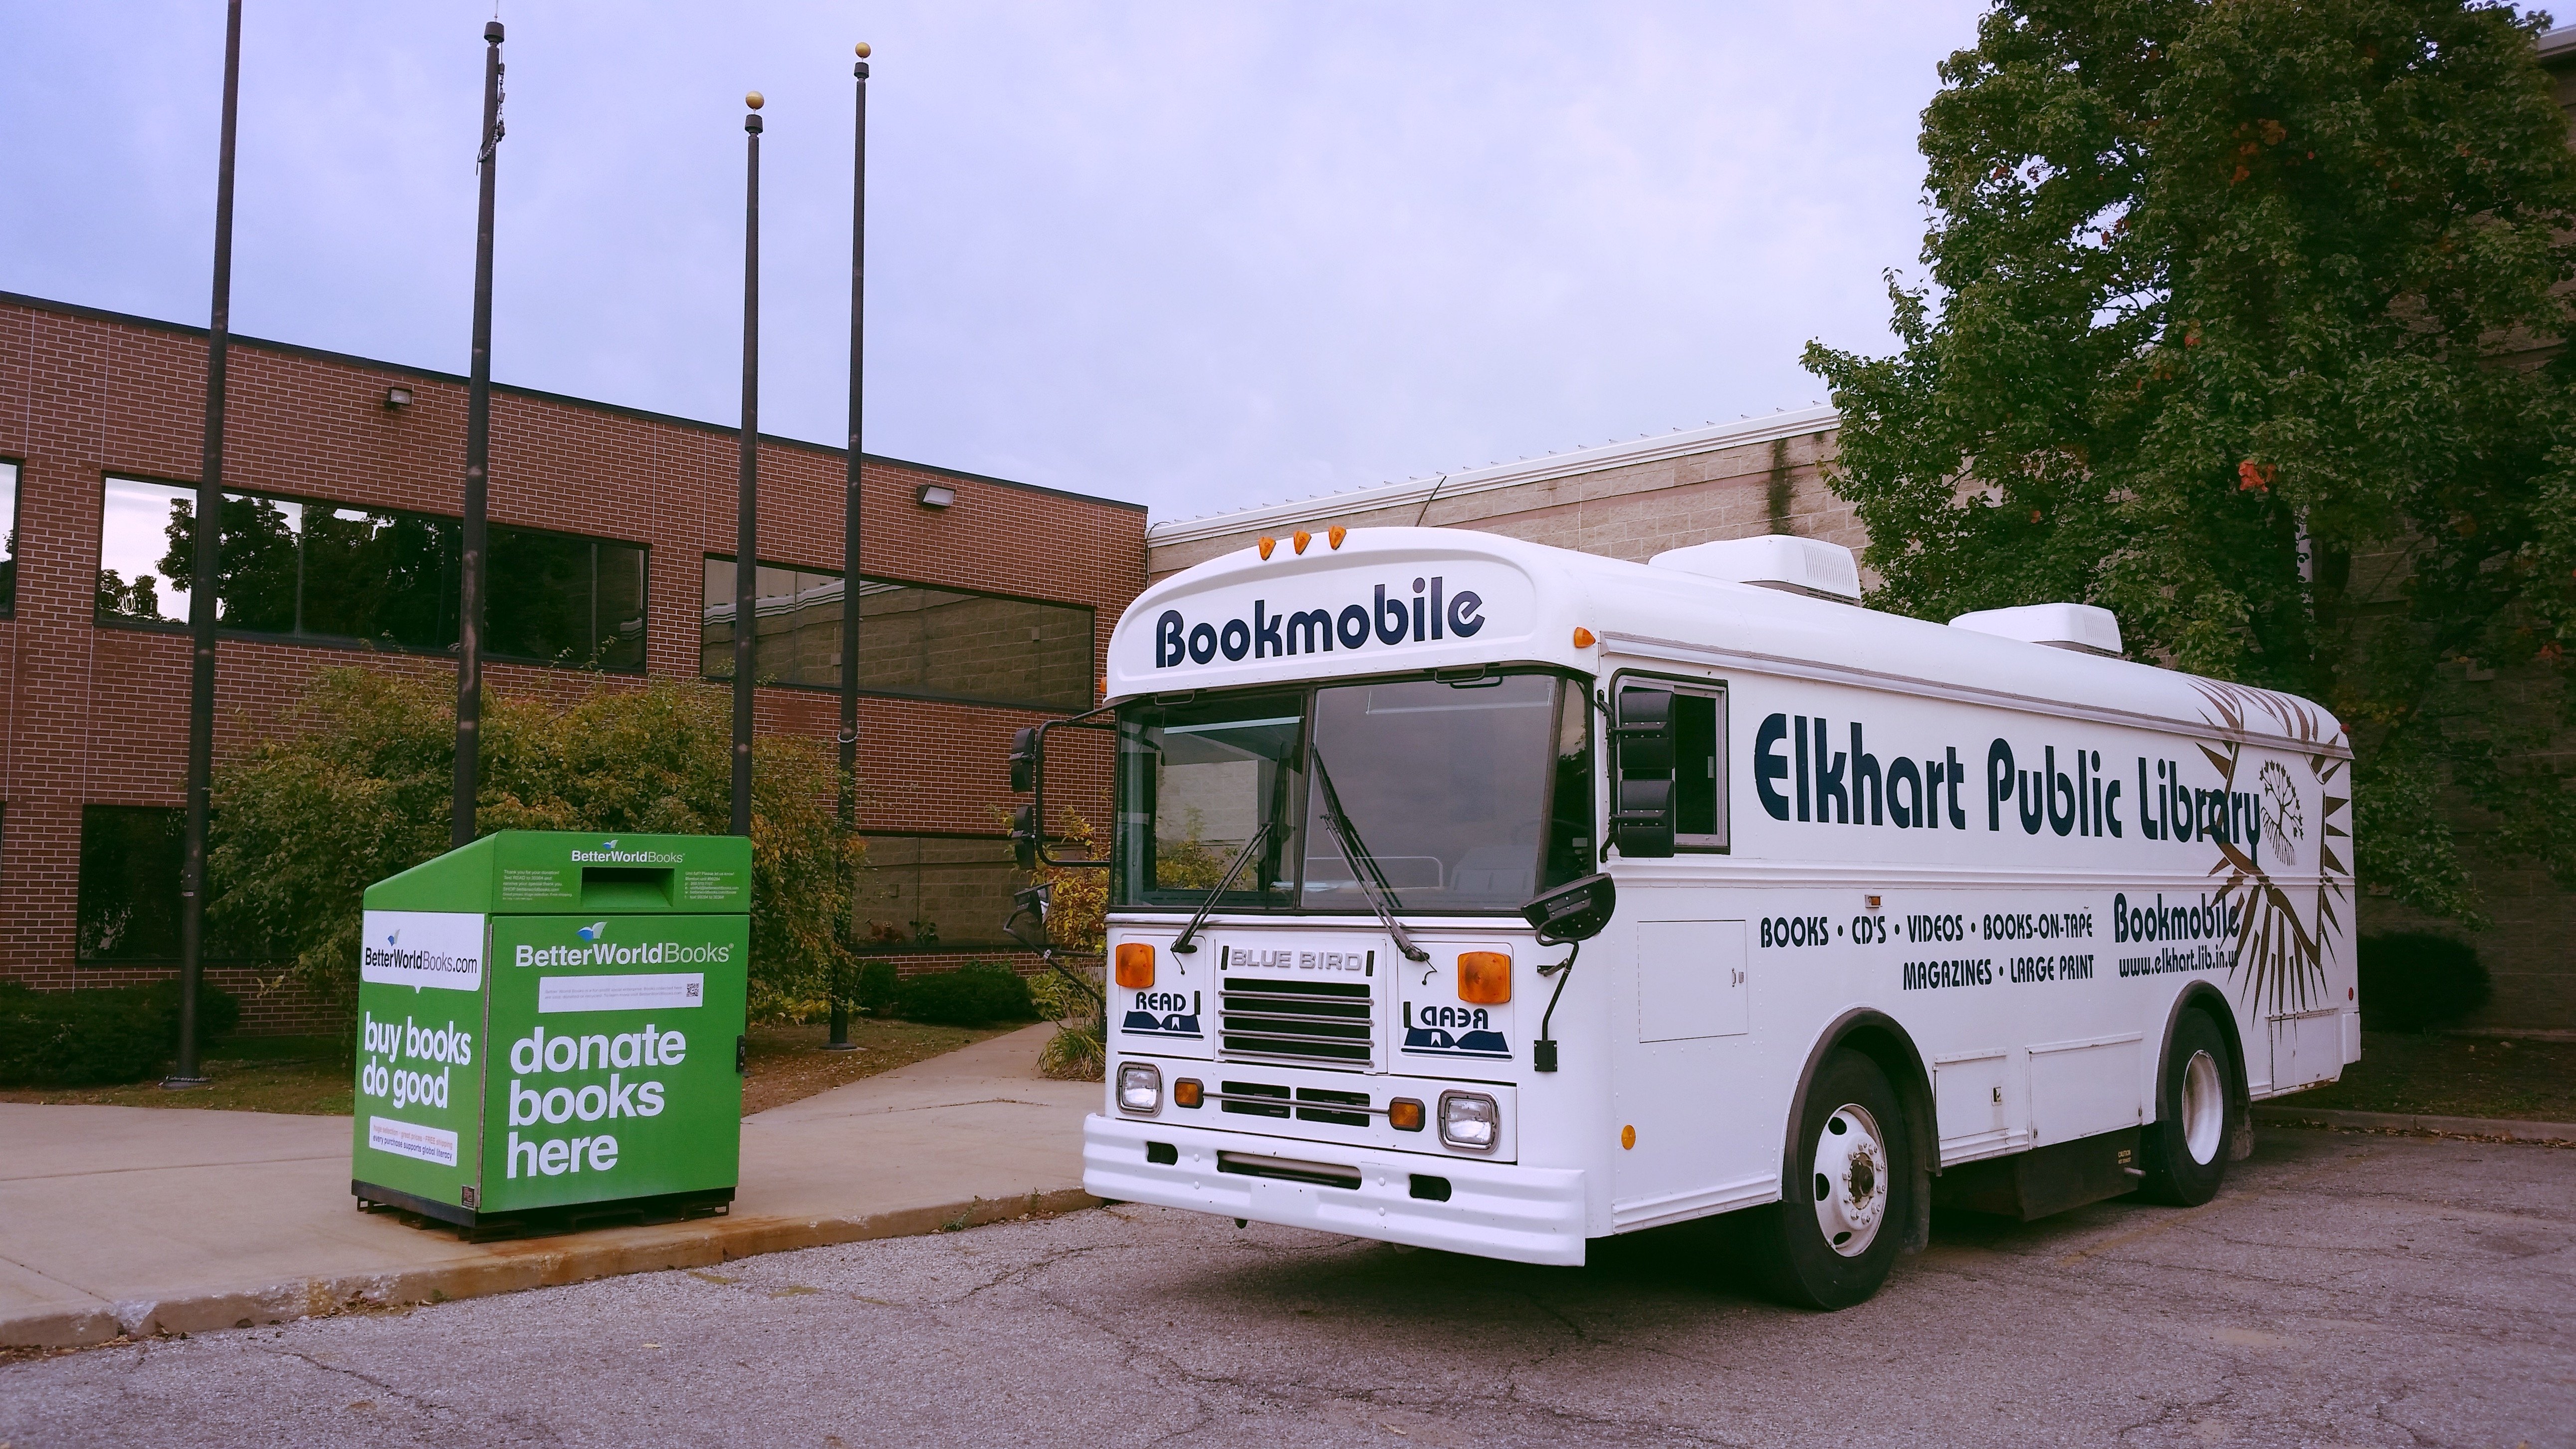 Better World Books Goes Mobile in Bookmobile